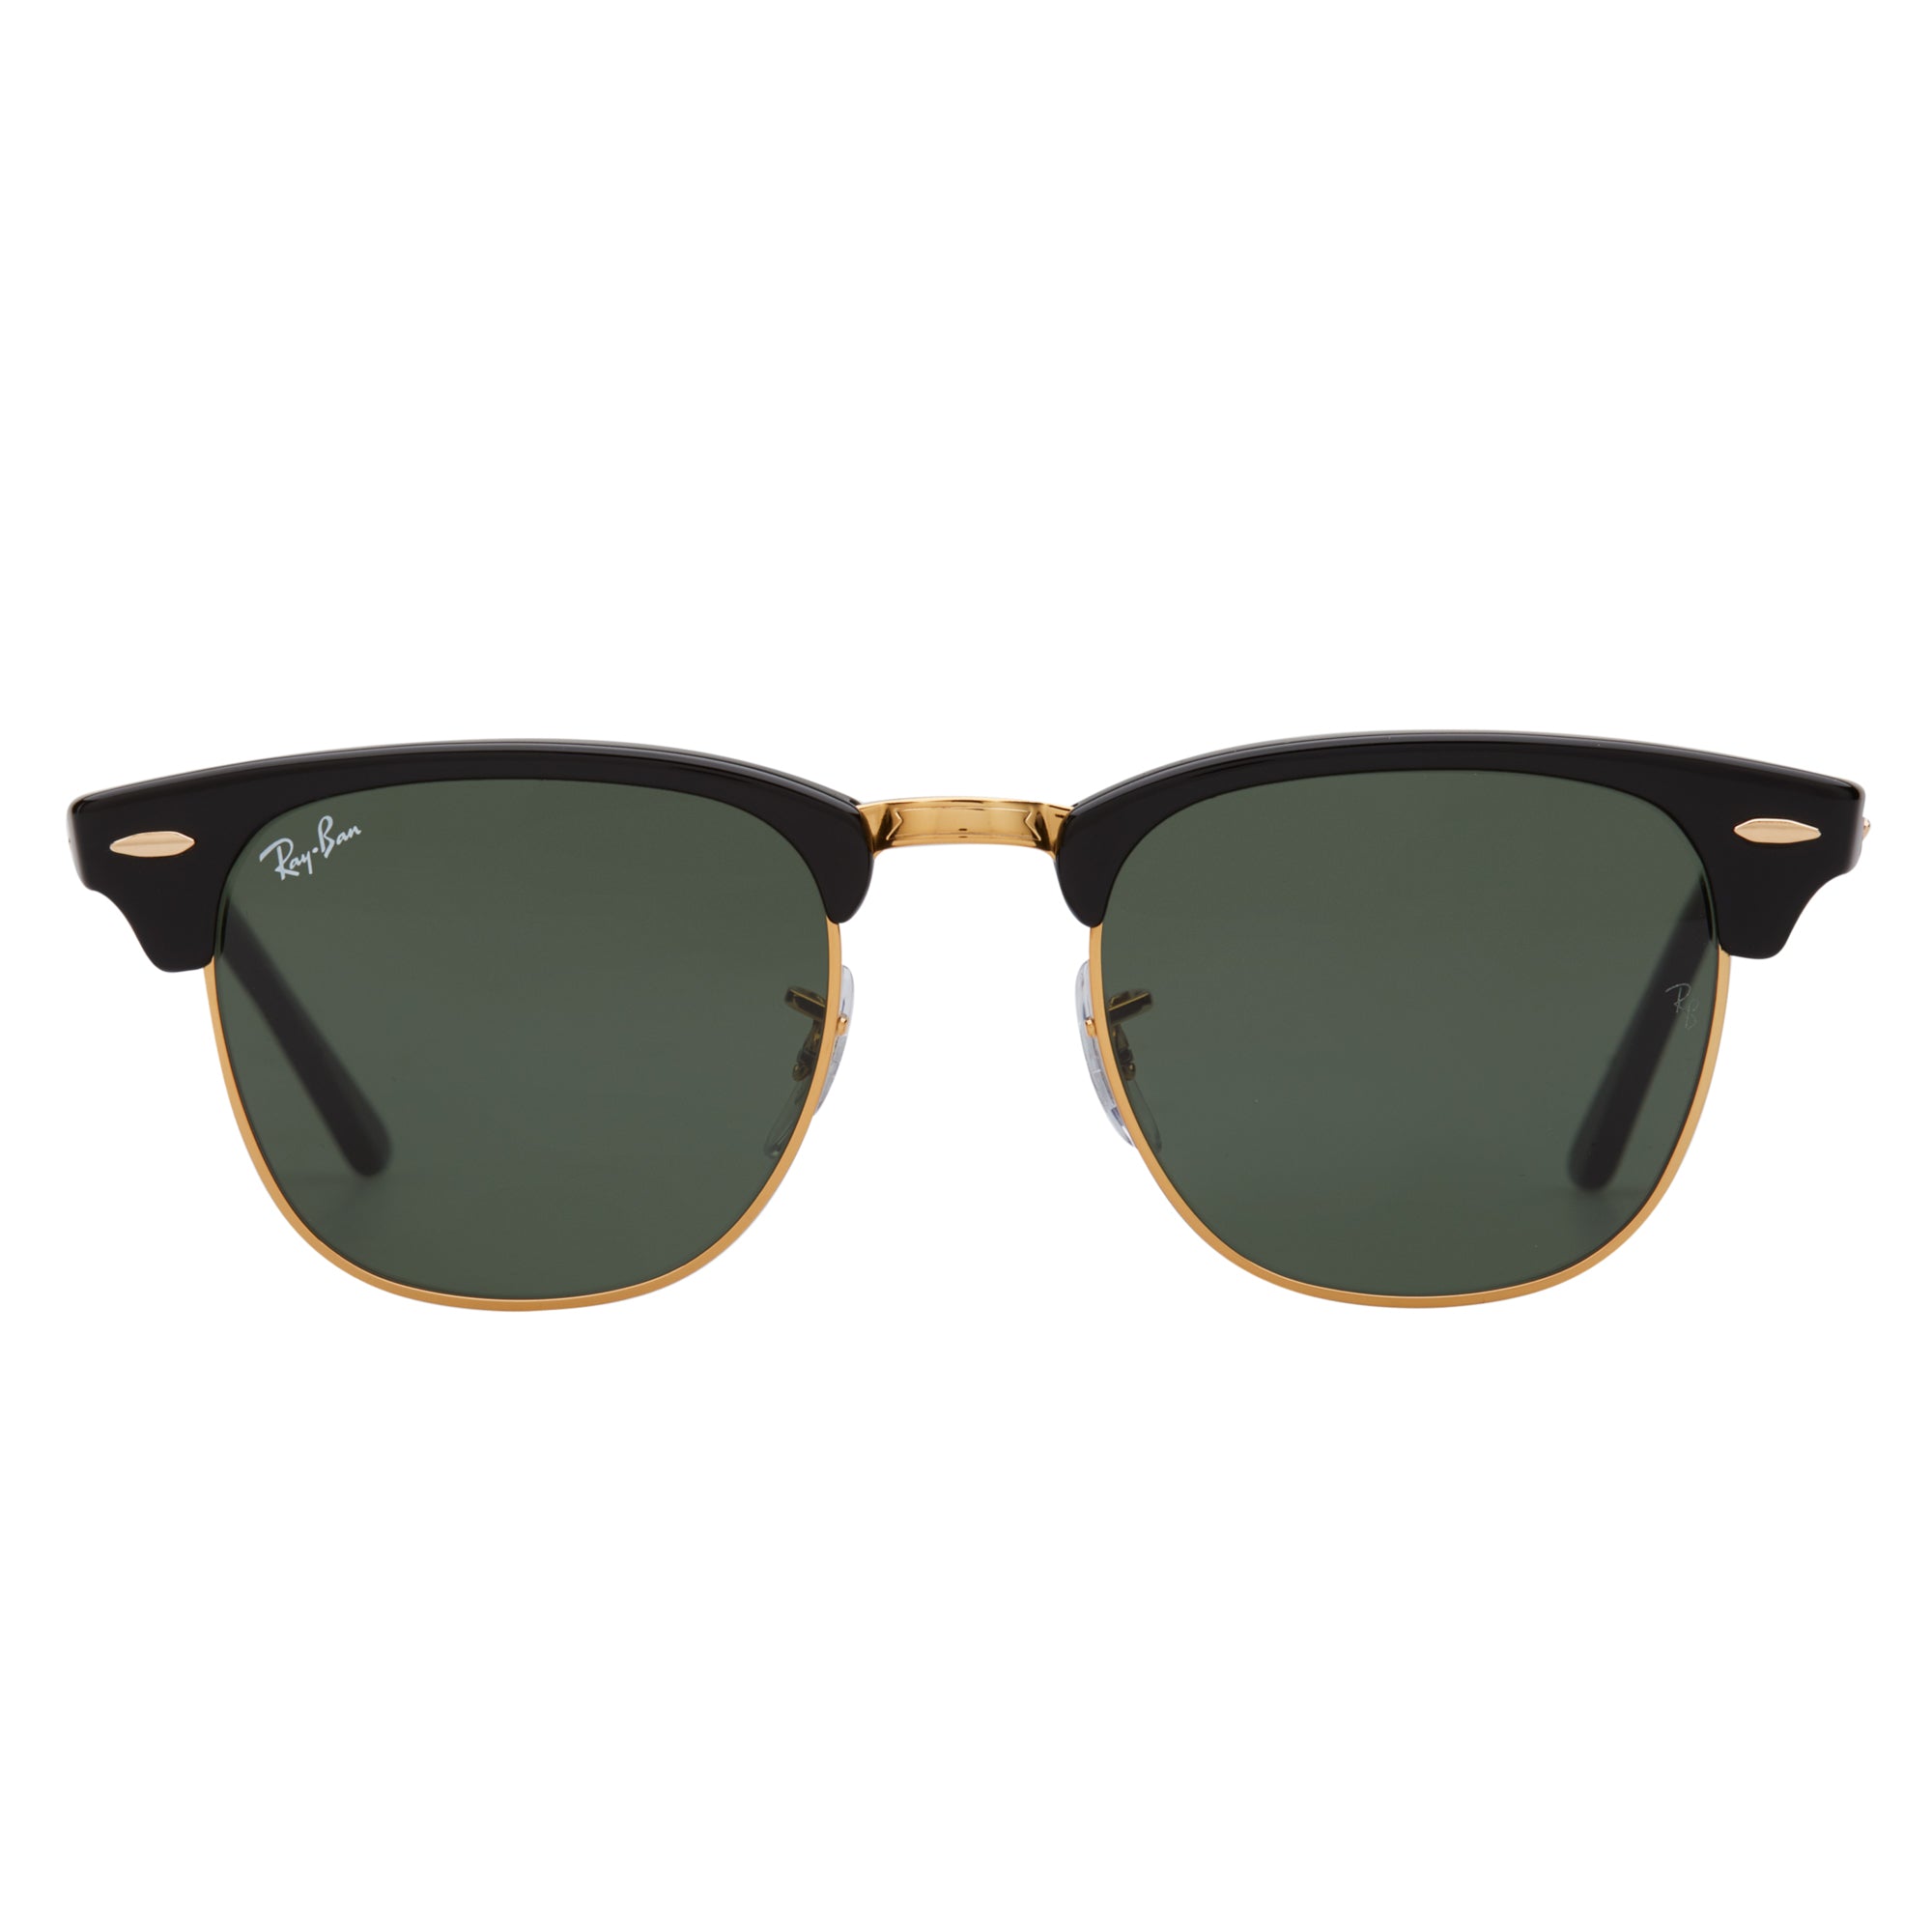 Ray-Ban Clubmaster RB3016 Sunglasses - Black/Green | MODE STORE